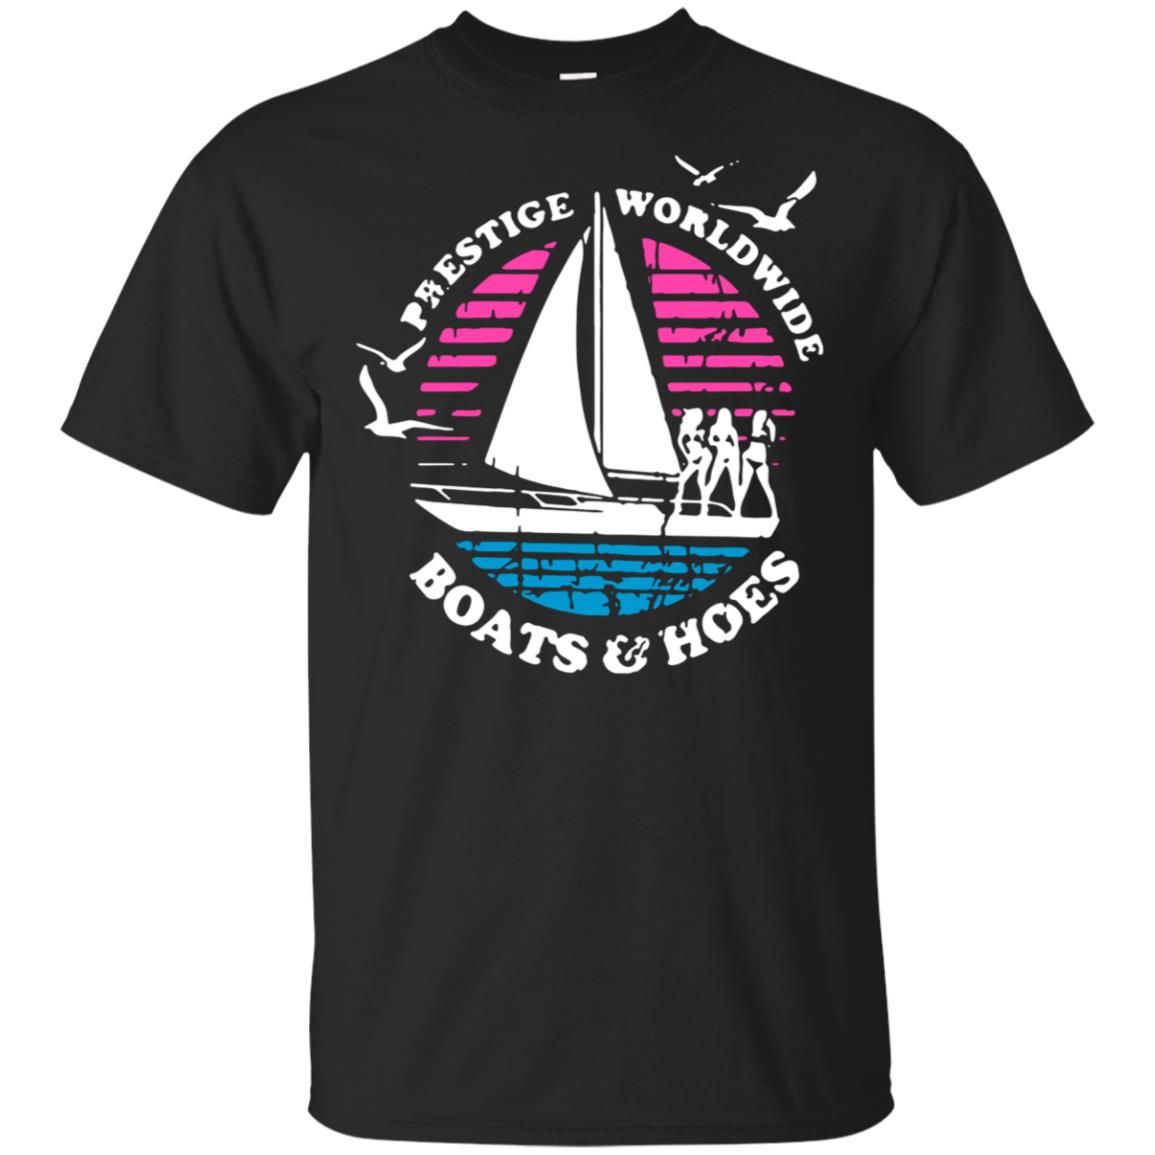 Prestige worldwide boats and hoes shirt Style: Gildan Ultra Cotton T-Shirt, Color: Black